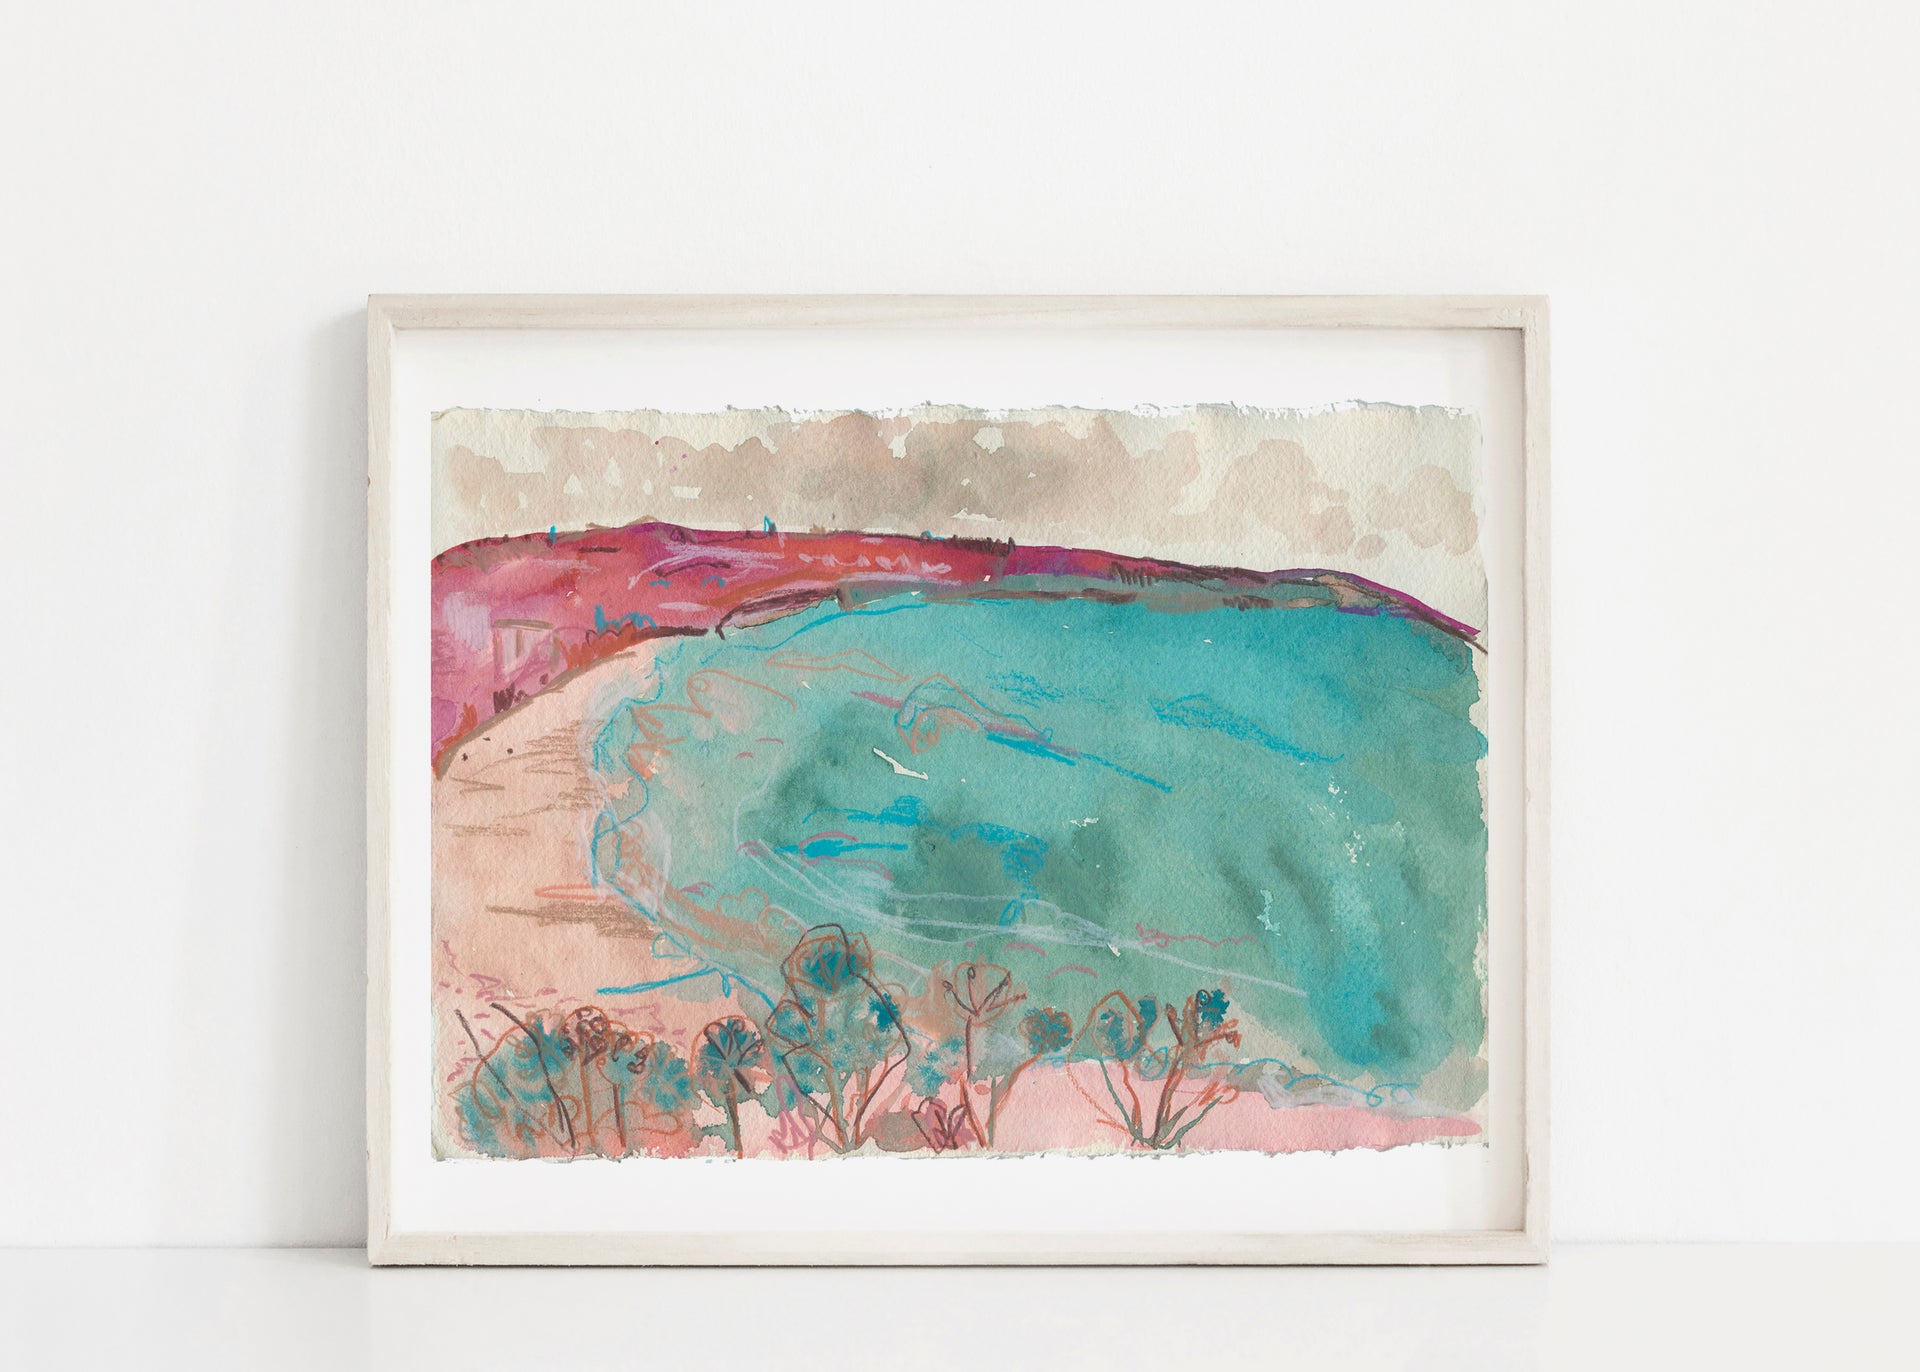 Seascape in tones of turquoise and headland in pink tones by artist Lucy Innes Williams